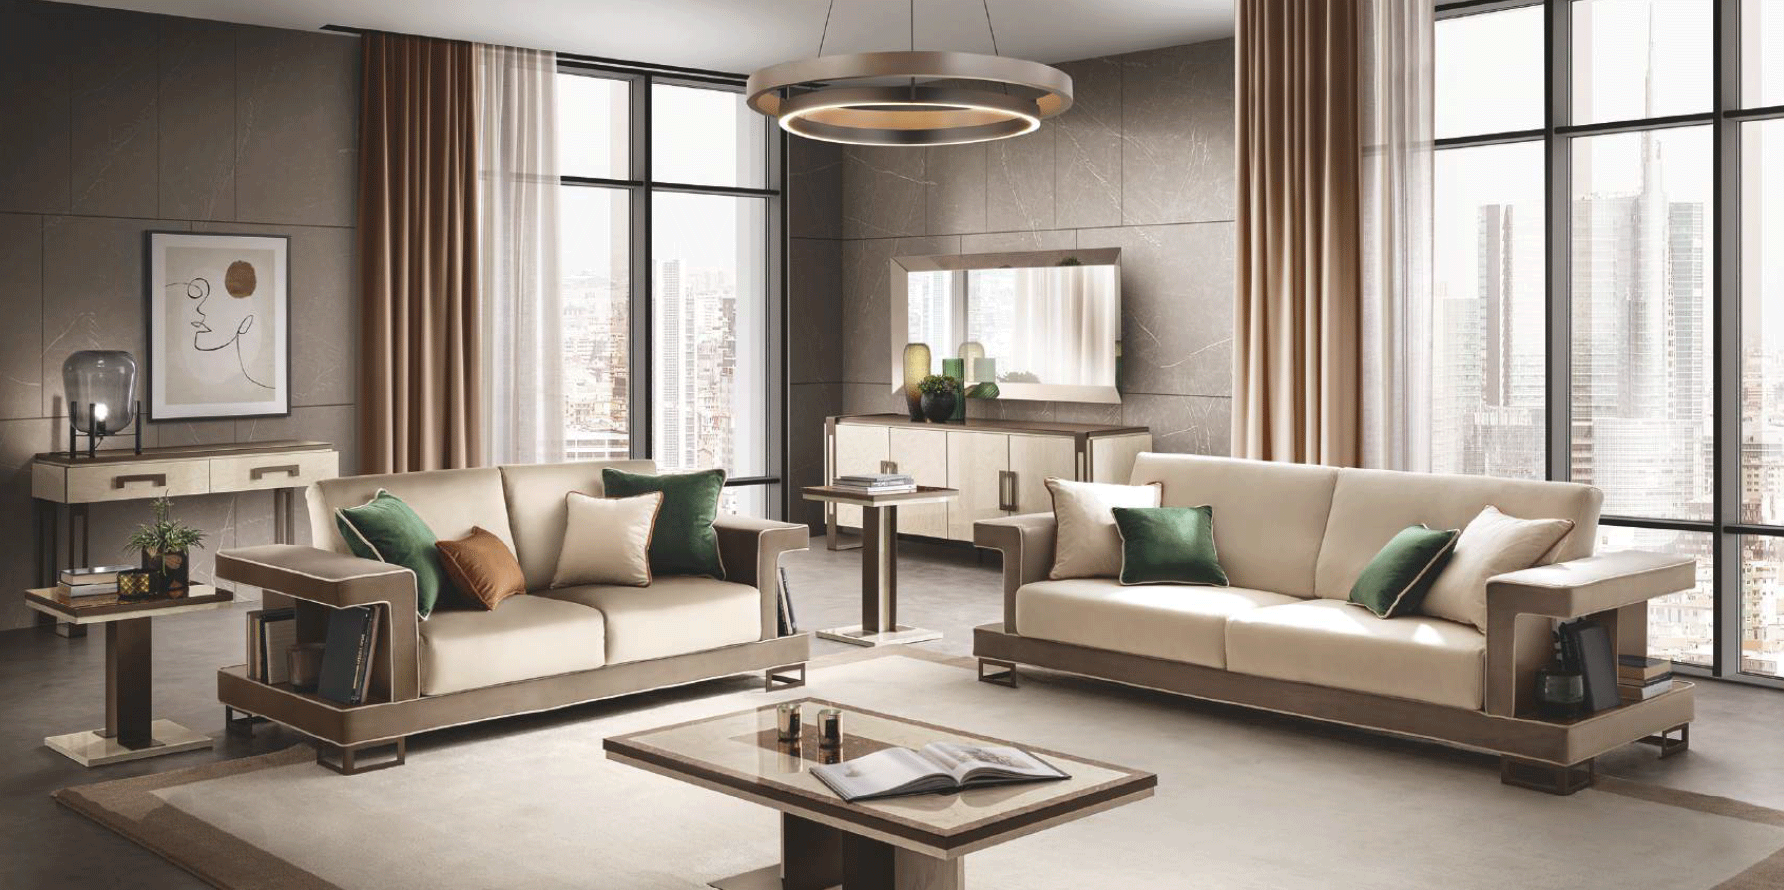 Brands Formerin Modern Living Room, Italy Poesia Living room Additional items